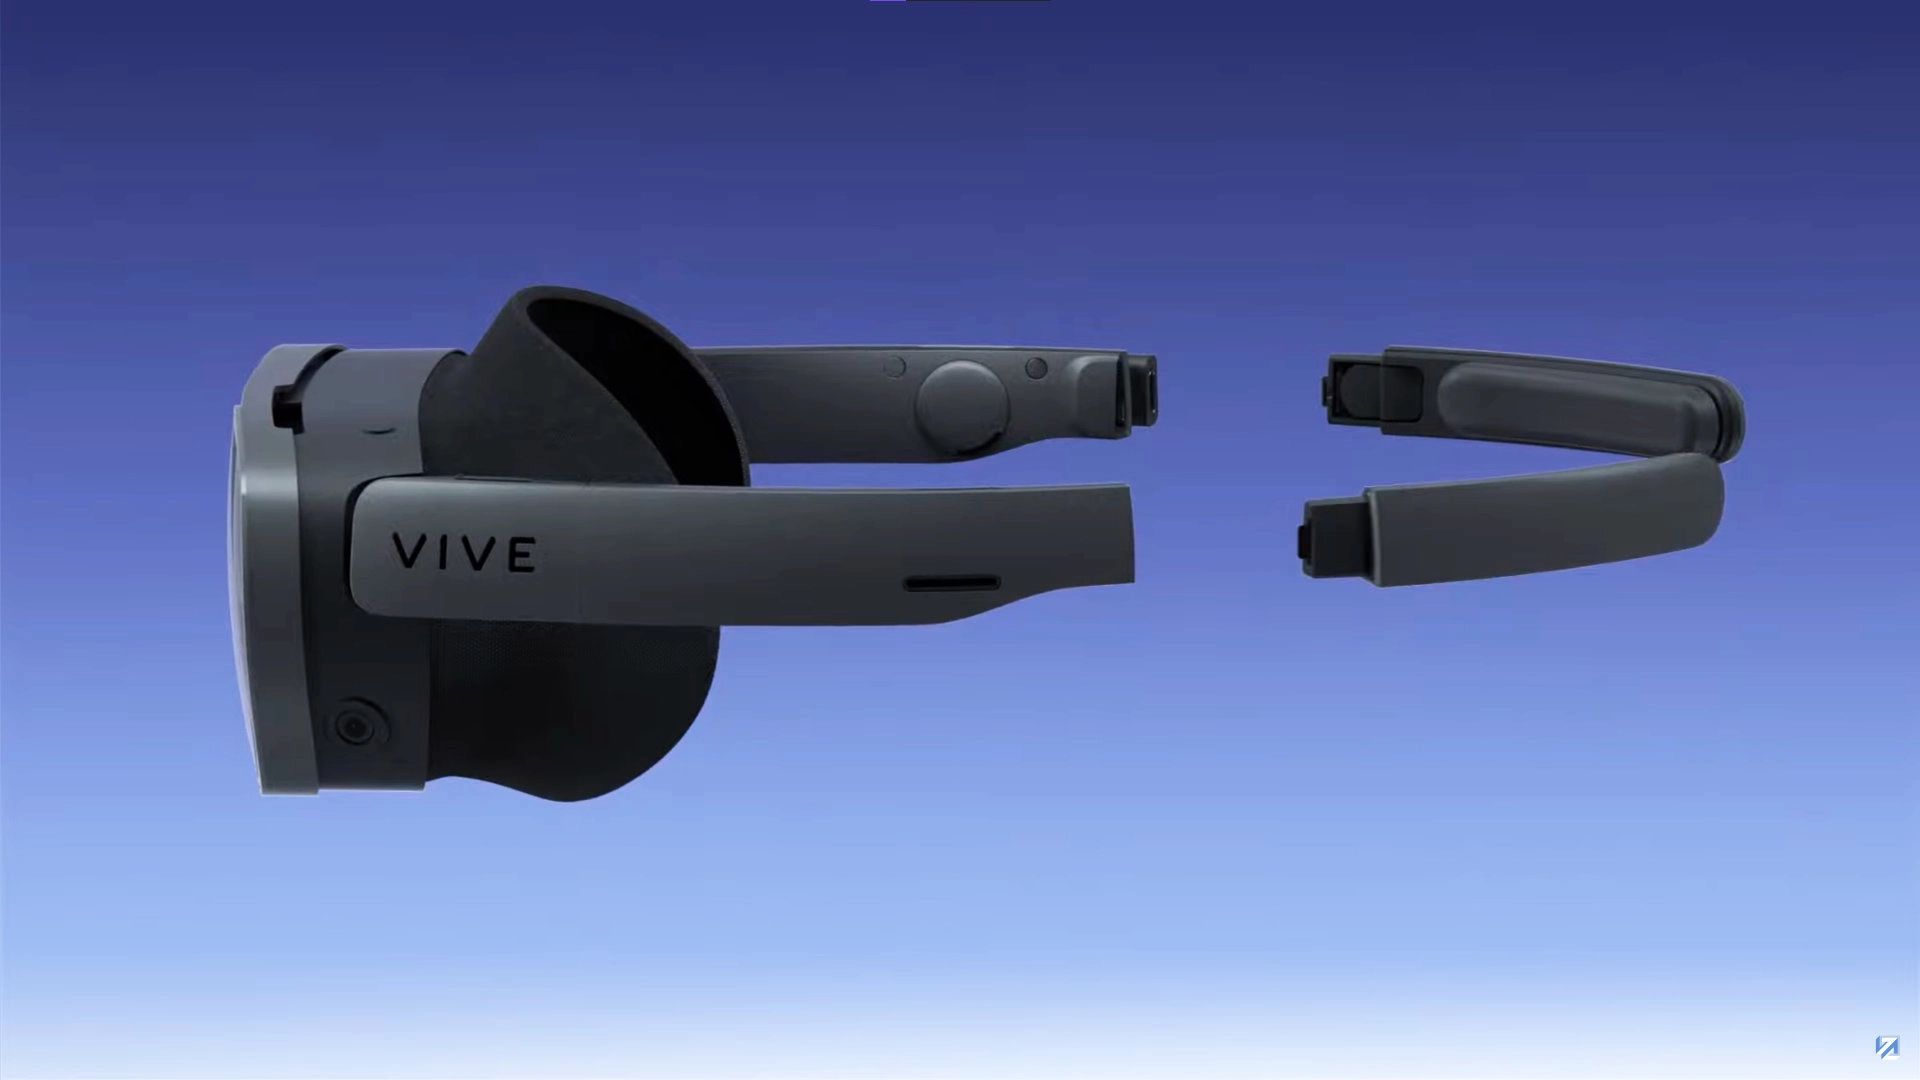 Vive XR Elite is announced: Specs, price and release date